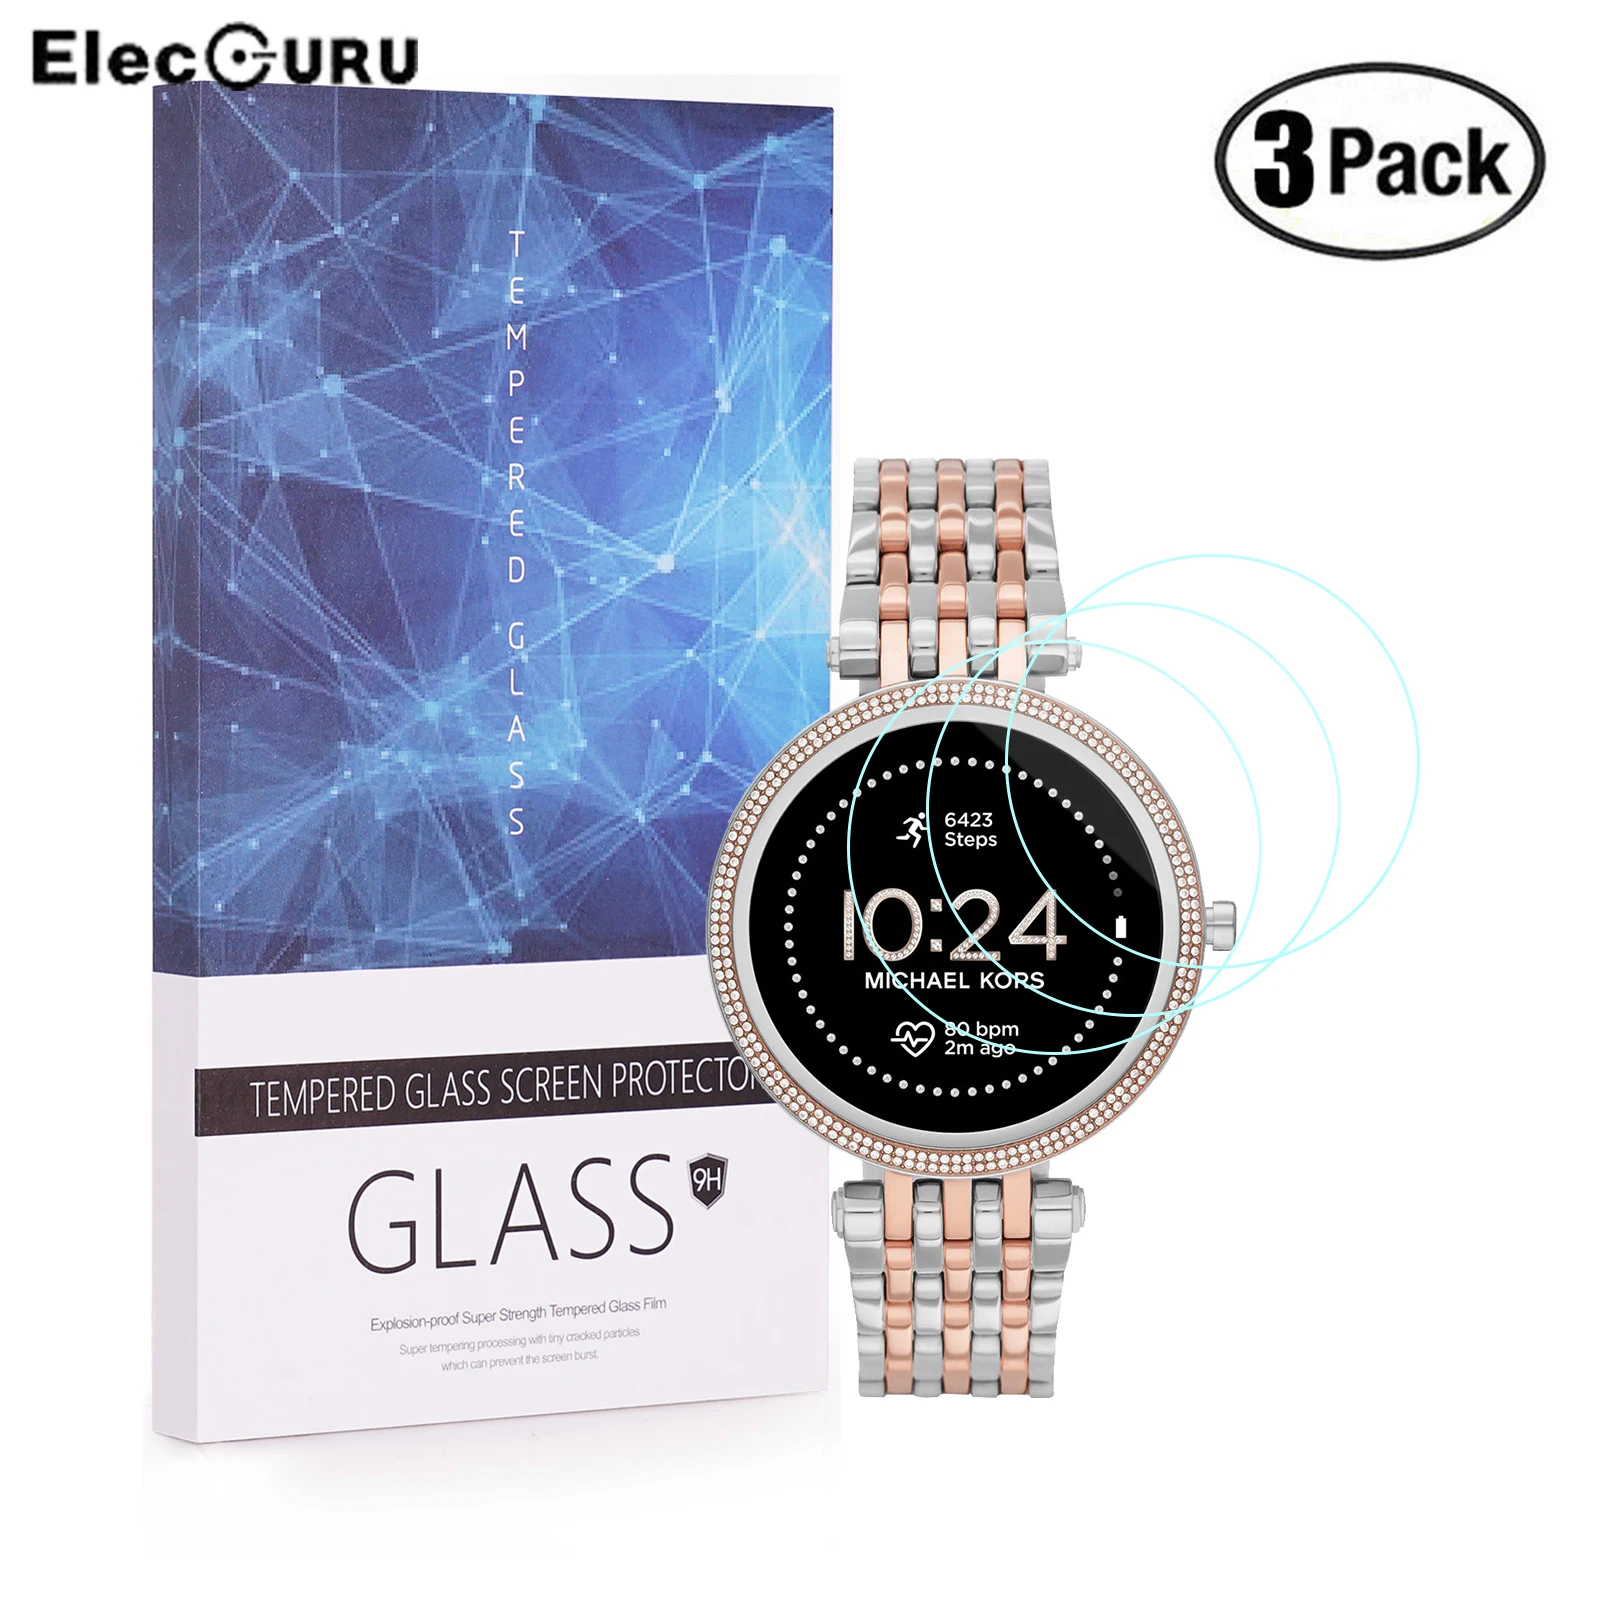 3 Pack for MICHAEL KORS Gen 5E Darci Smartwatch Tempered Glass Screen Protector 9H Protector Scratch Resistant Anti-Shatter